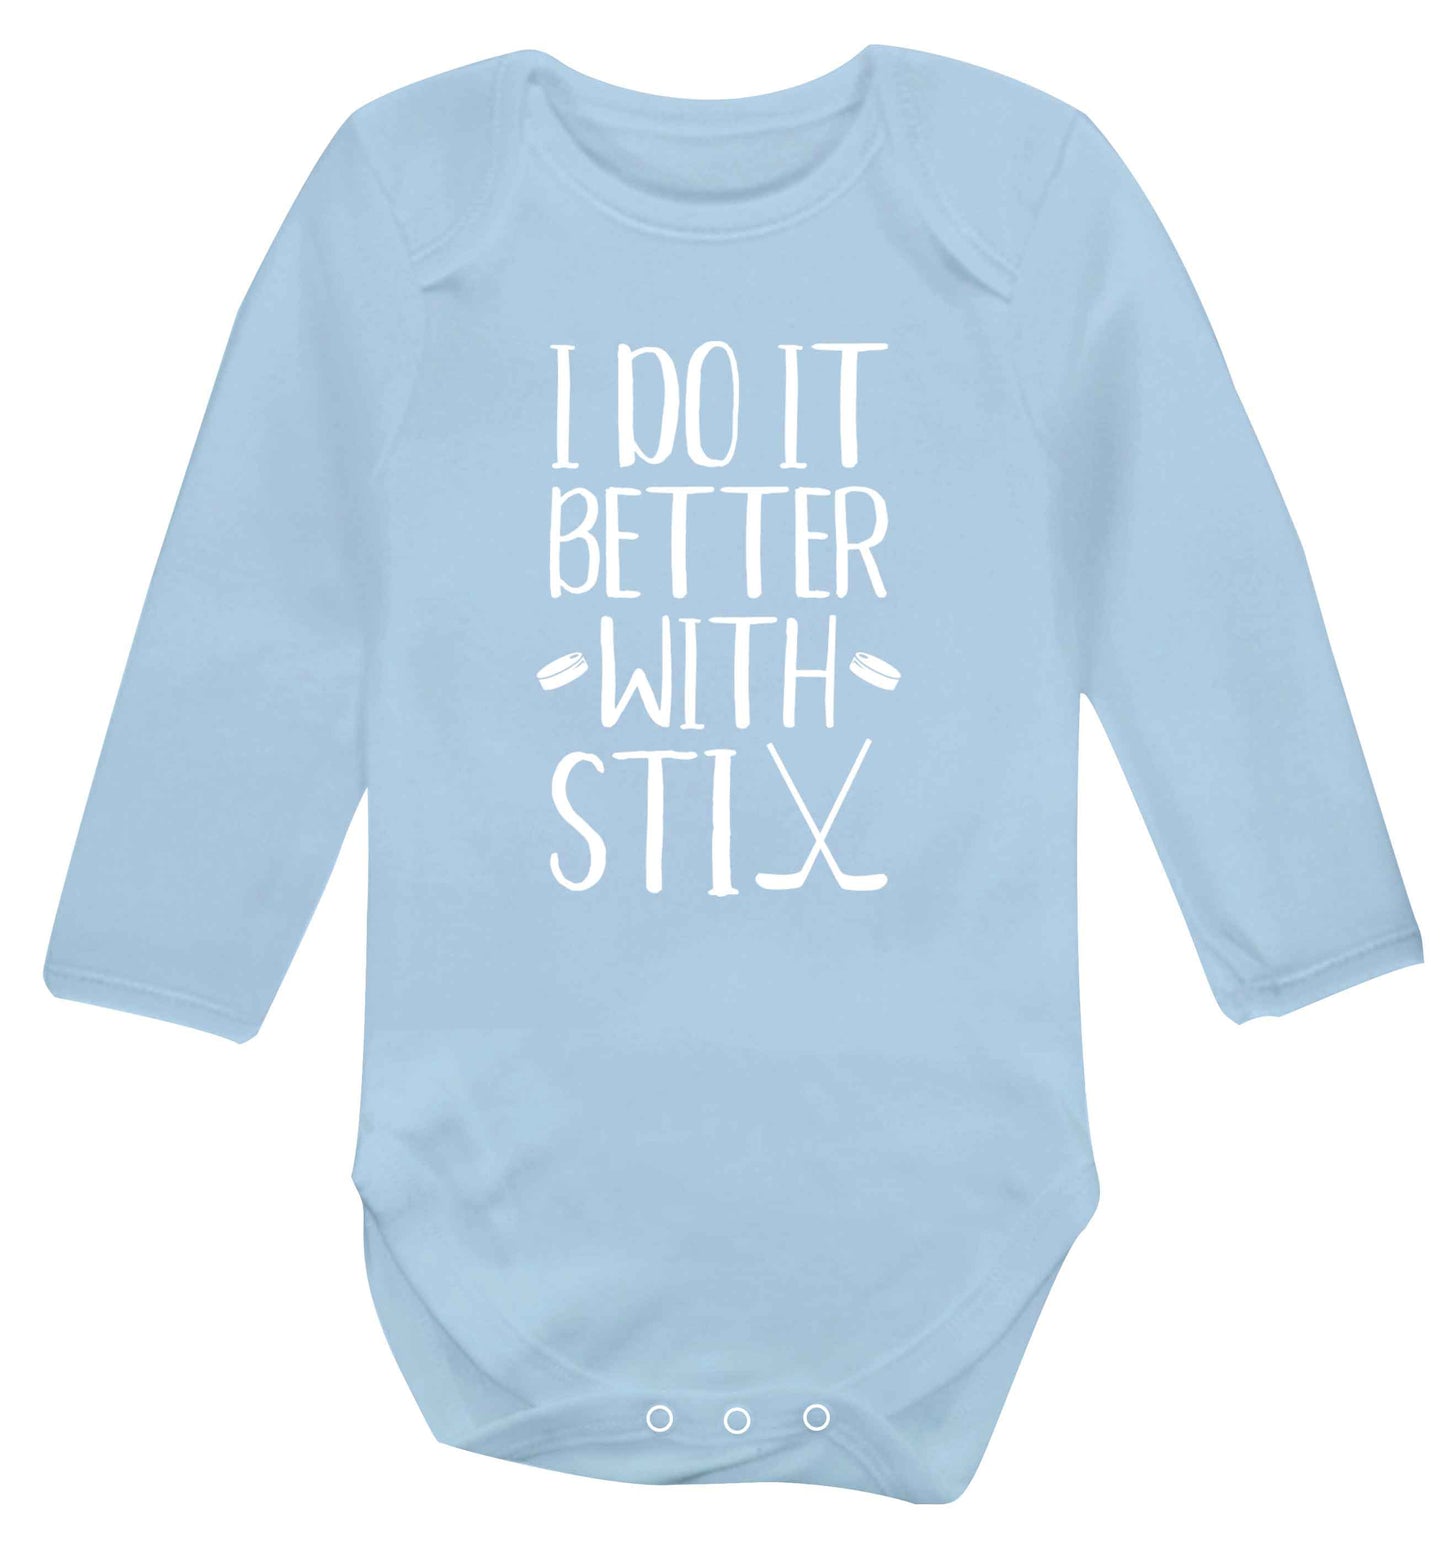 I do it better with stix (hockey) Baby Vest long sleeved pale blue 6-12 months